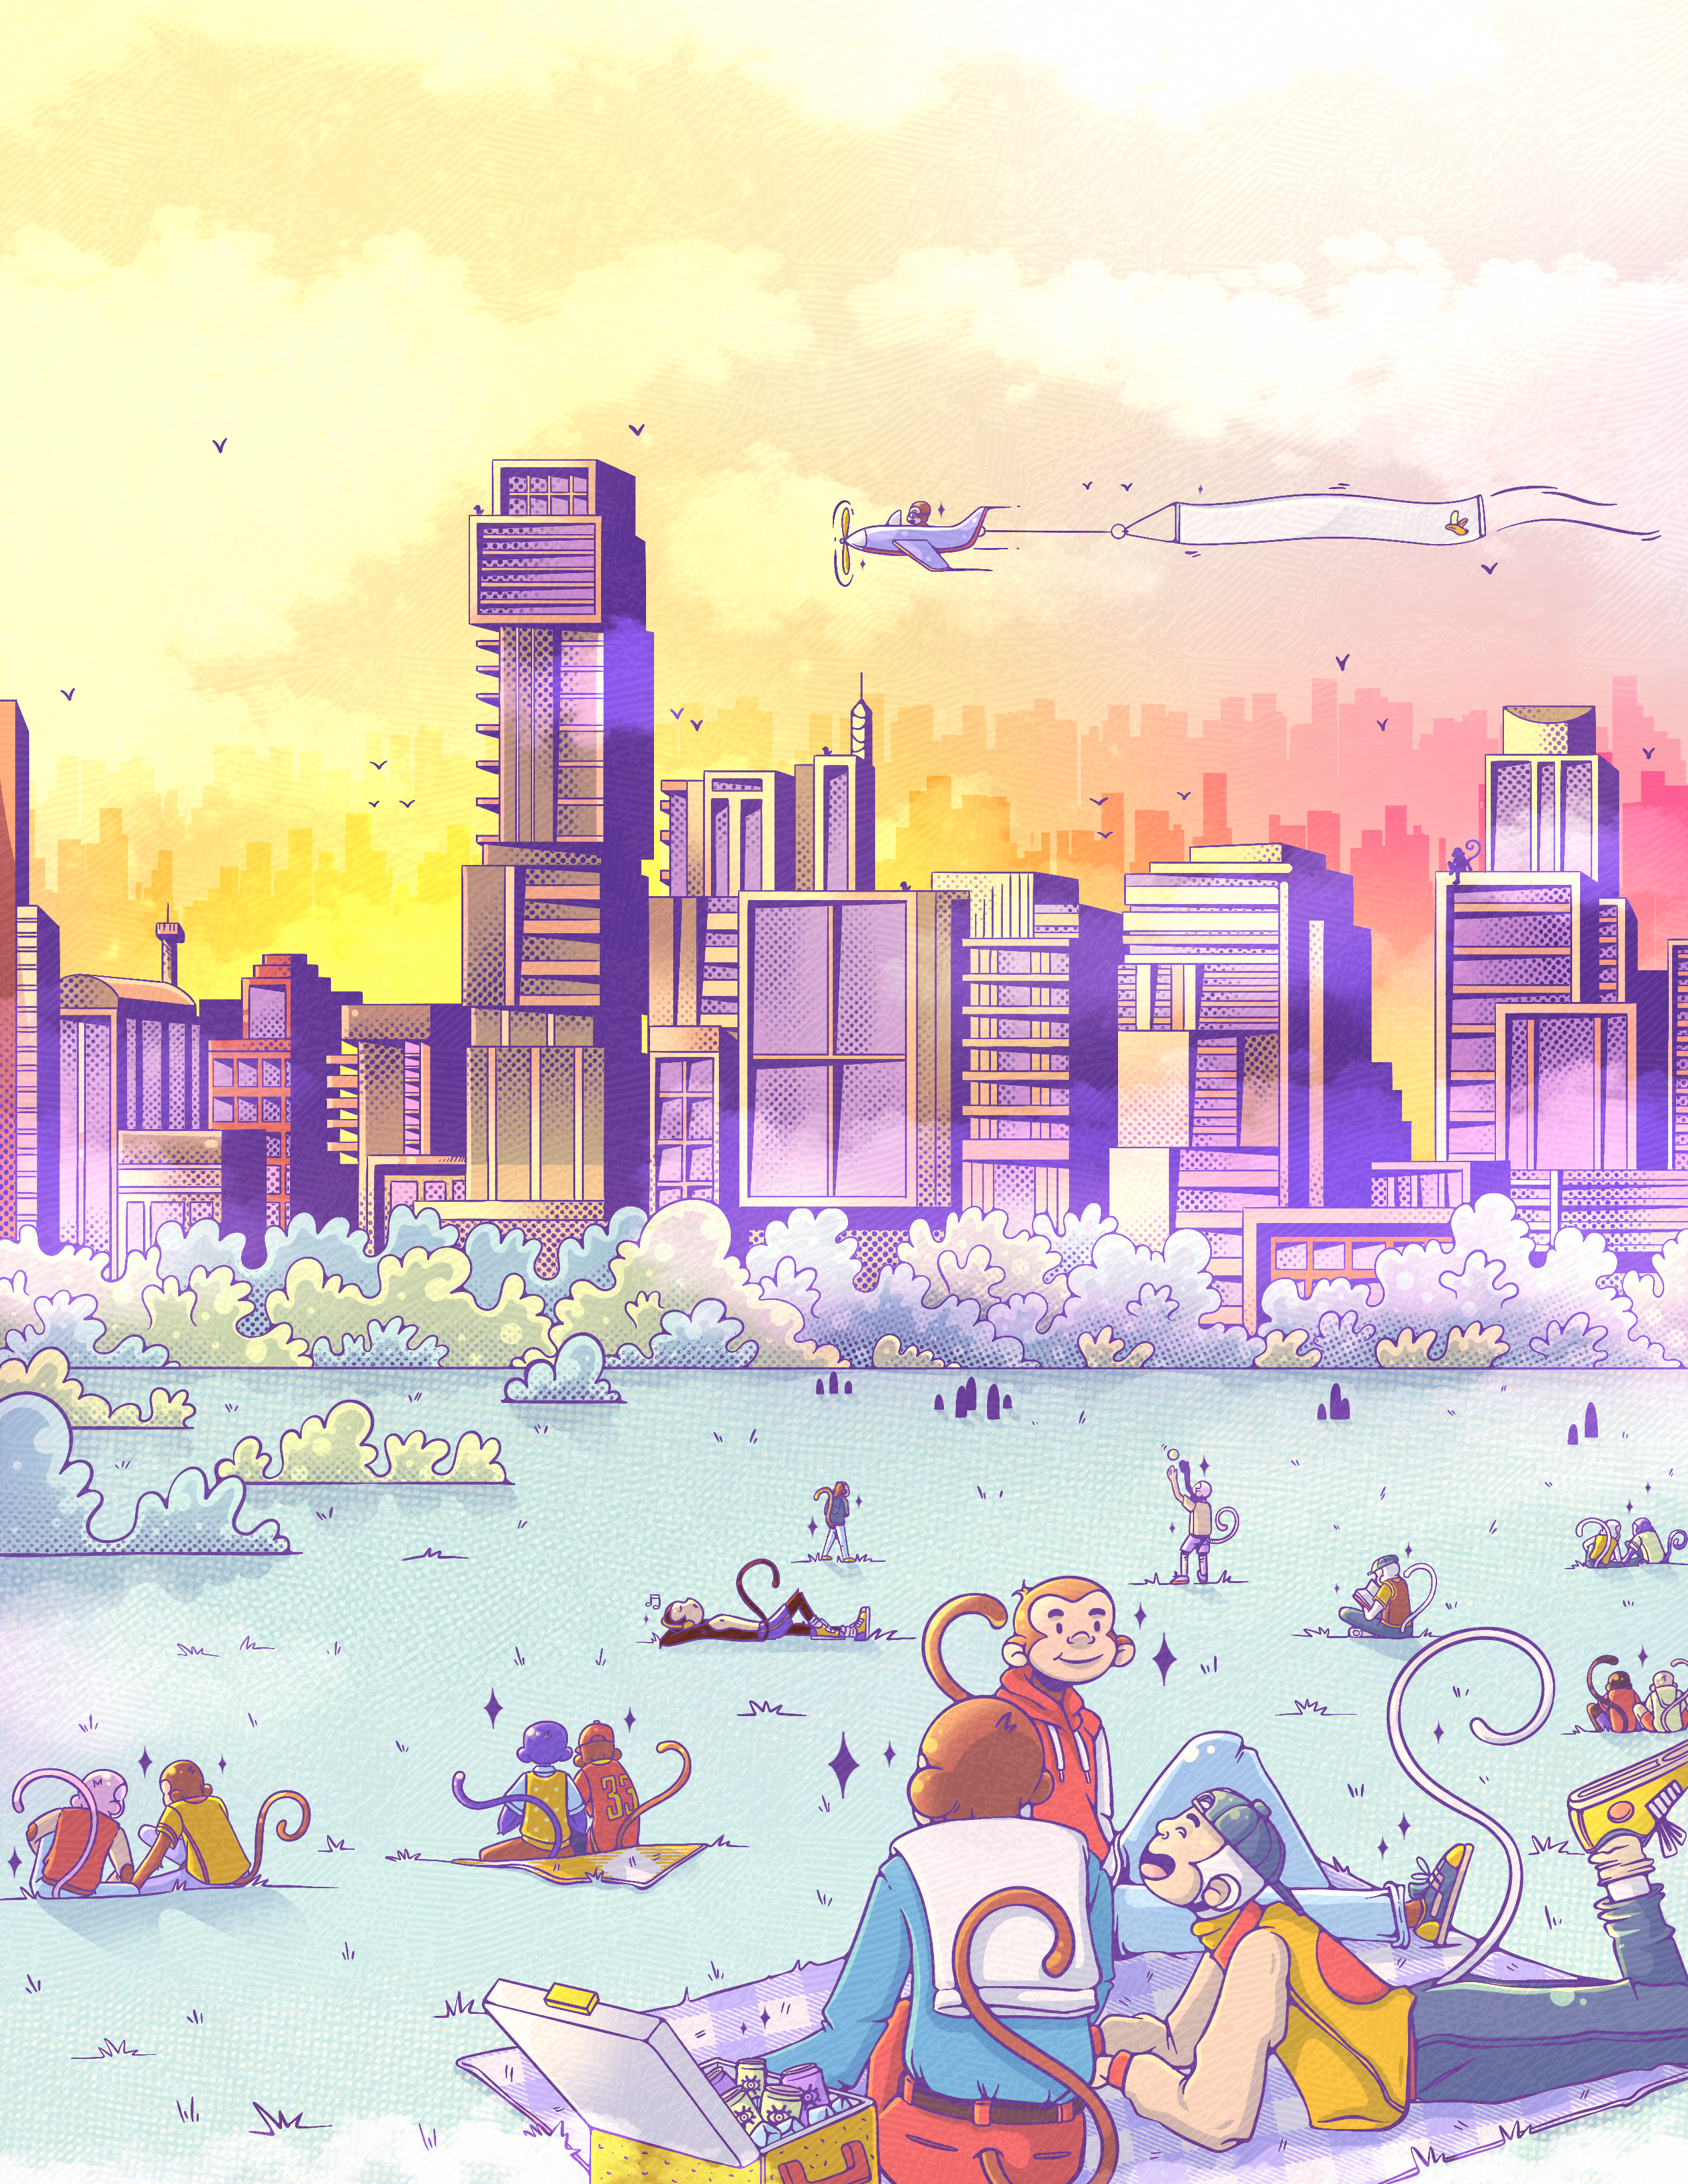 An assemble of monkies gathered on a lawn to gaze at a city skyline.